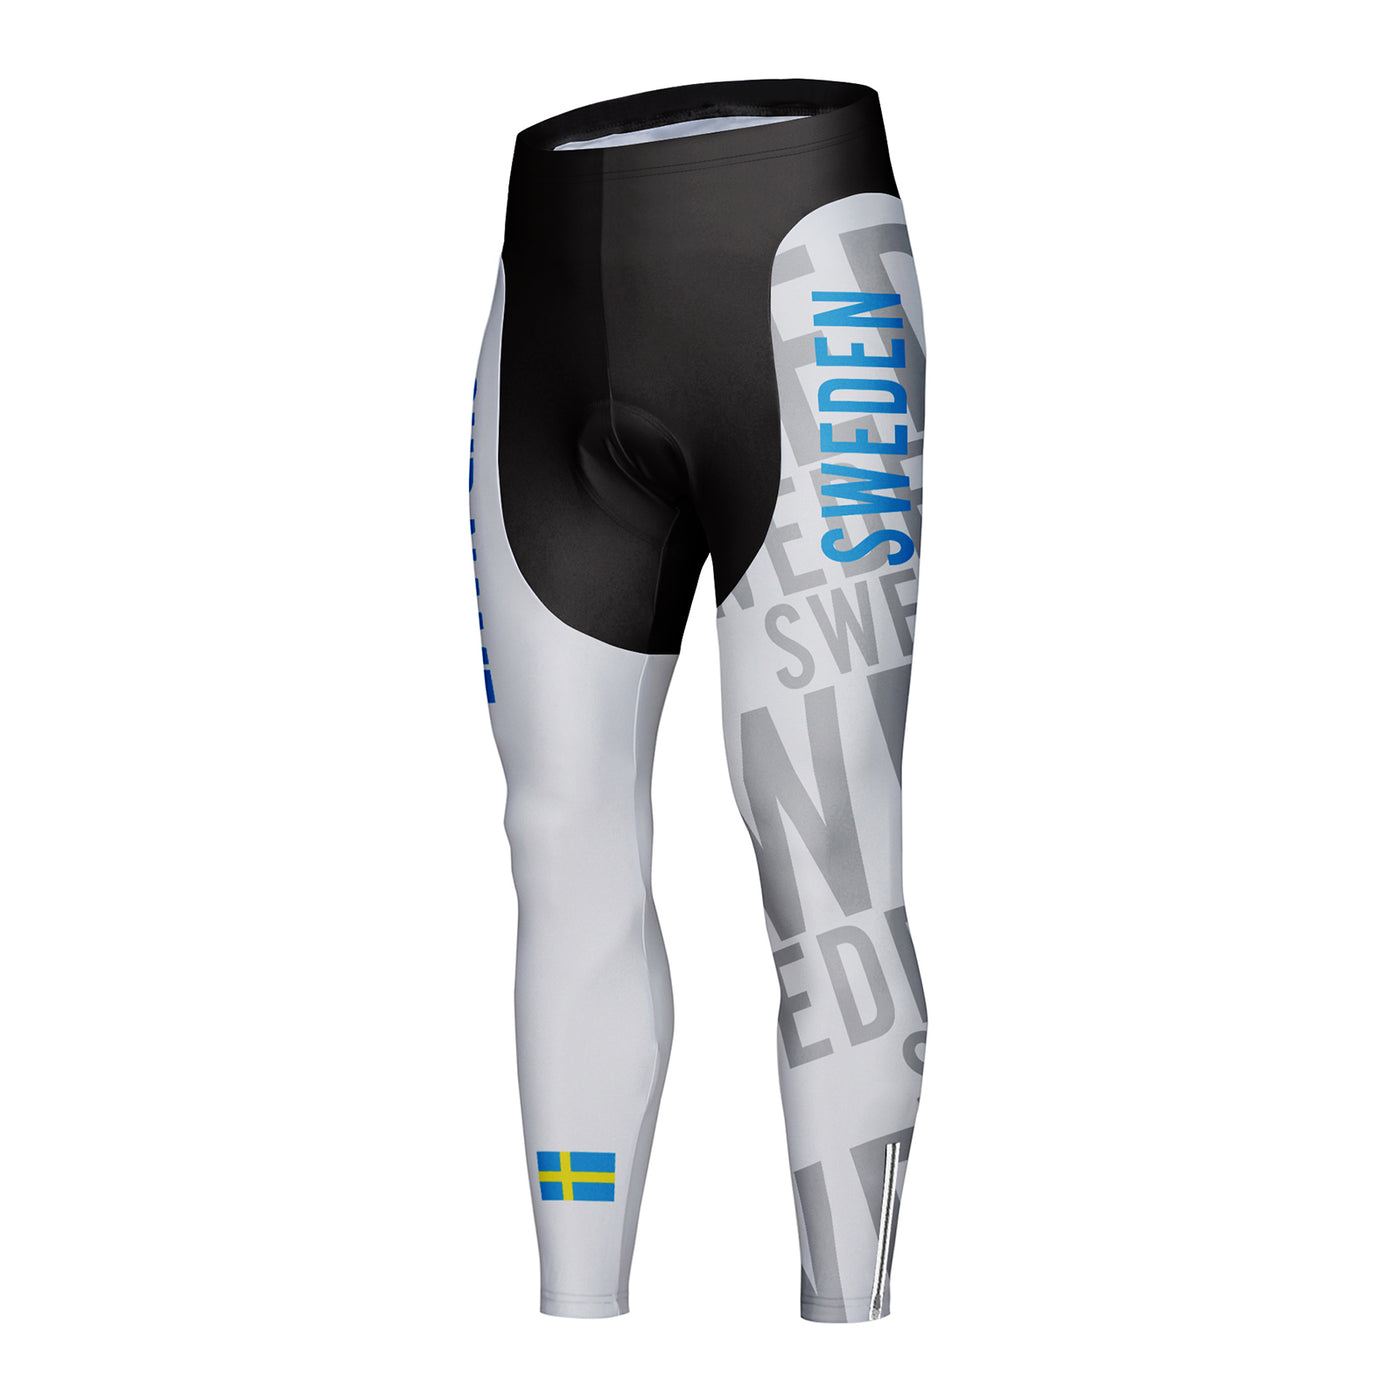 Customized Sweden Unisex Cycling Tights Long Pants